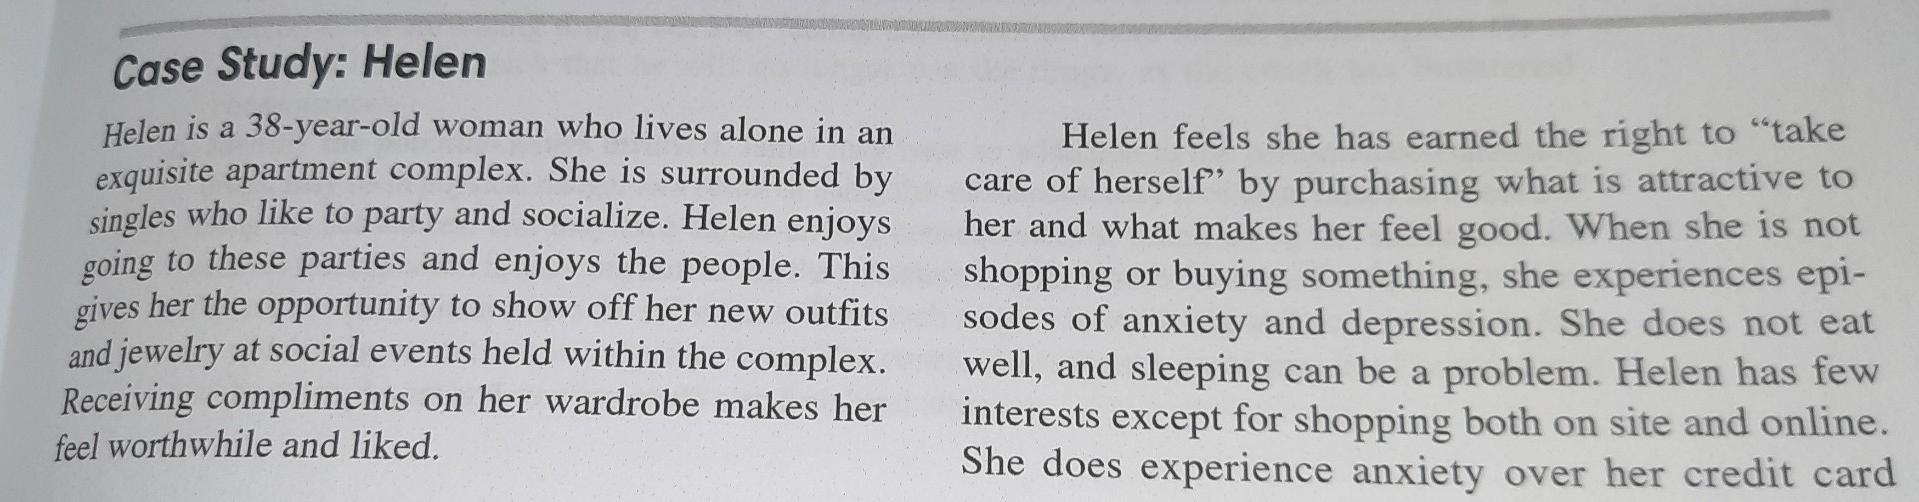 Solved Case Study: Helen Helen is a 38-year-old woman who